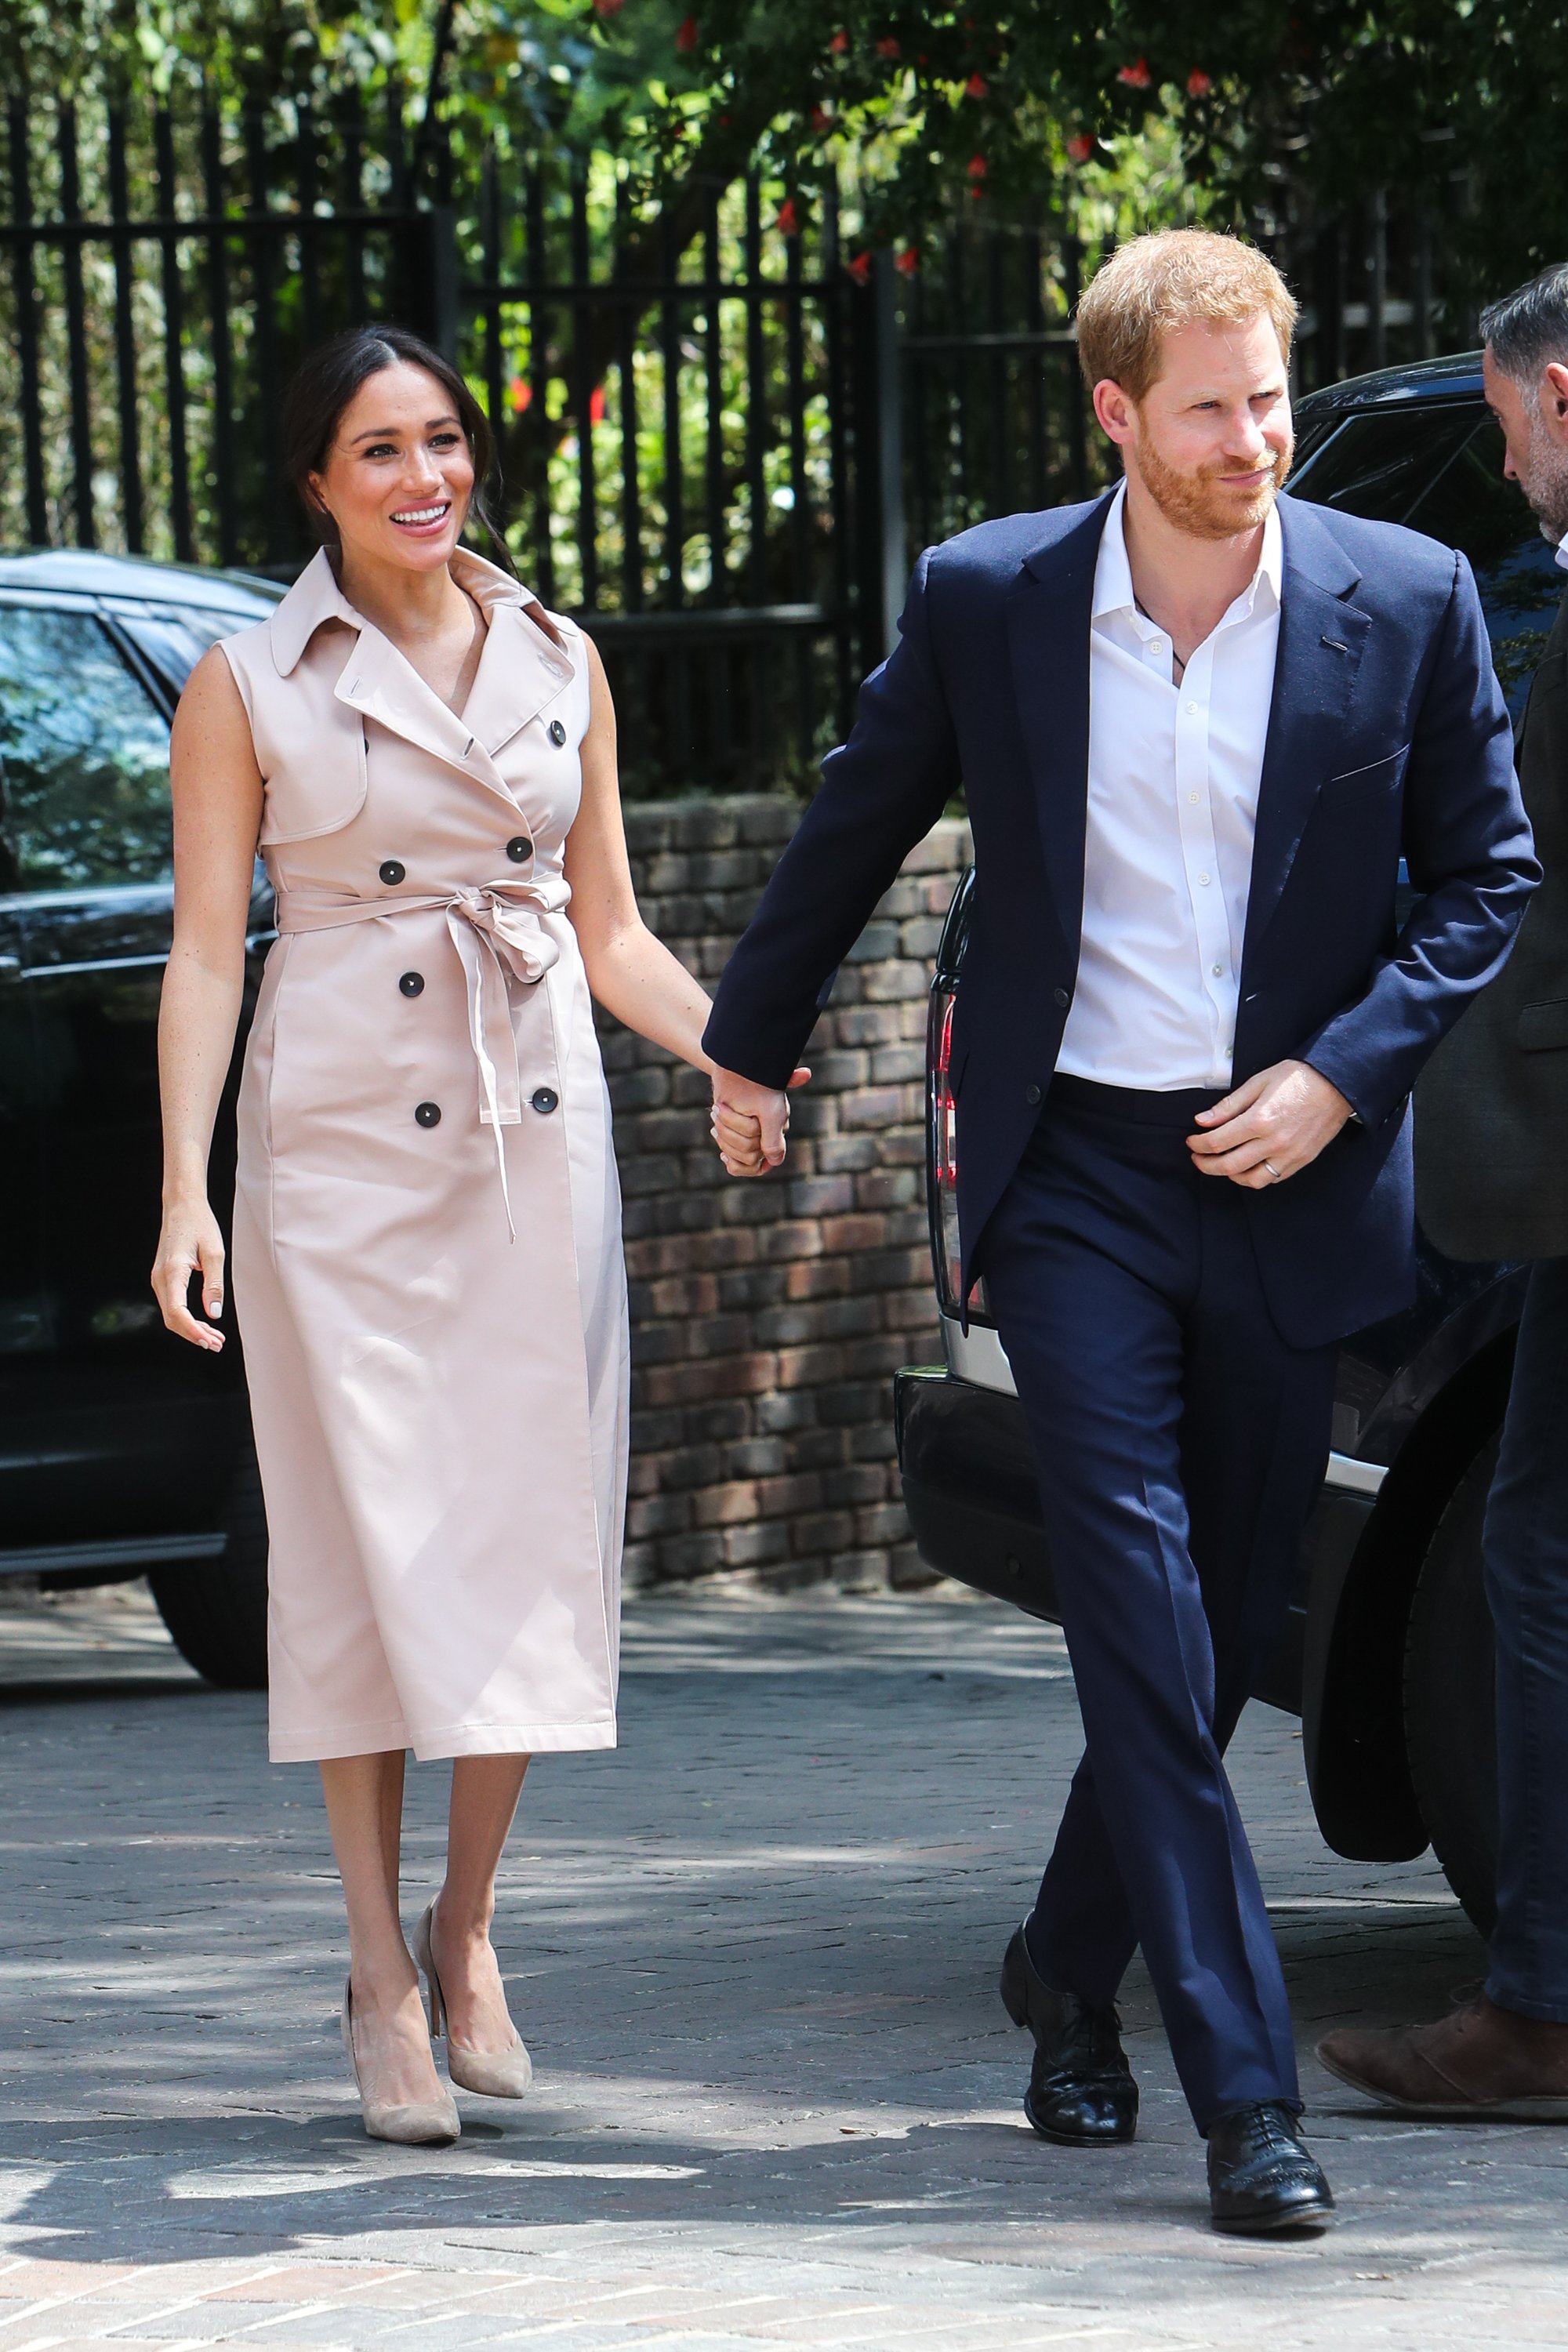 Meghan Markle and Prince Harry arrive to meet Graca Machel, widow of the late Nelson Mandela on October 2, 2019 in Johannesburg, South Africa ┃Source: Getty Images